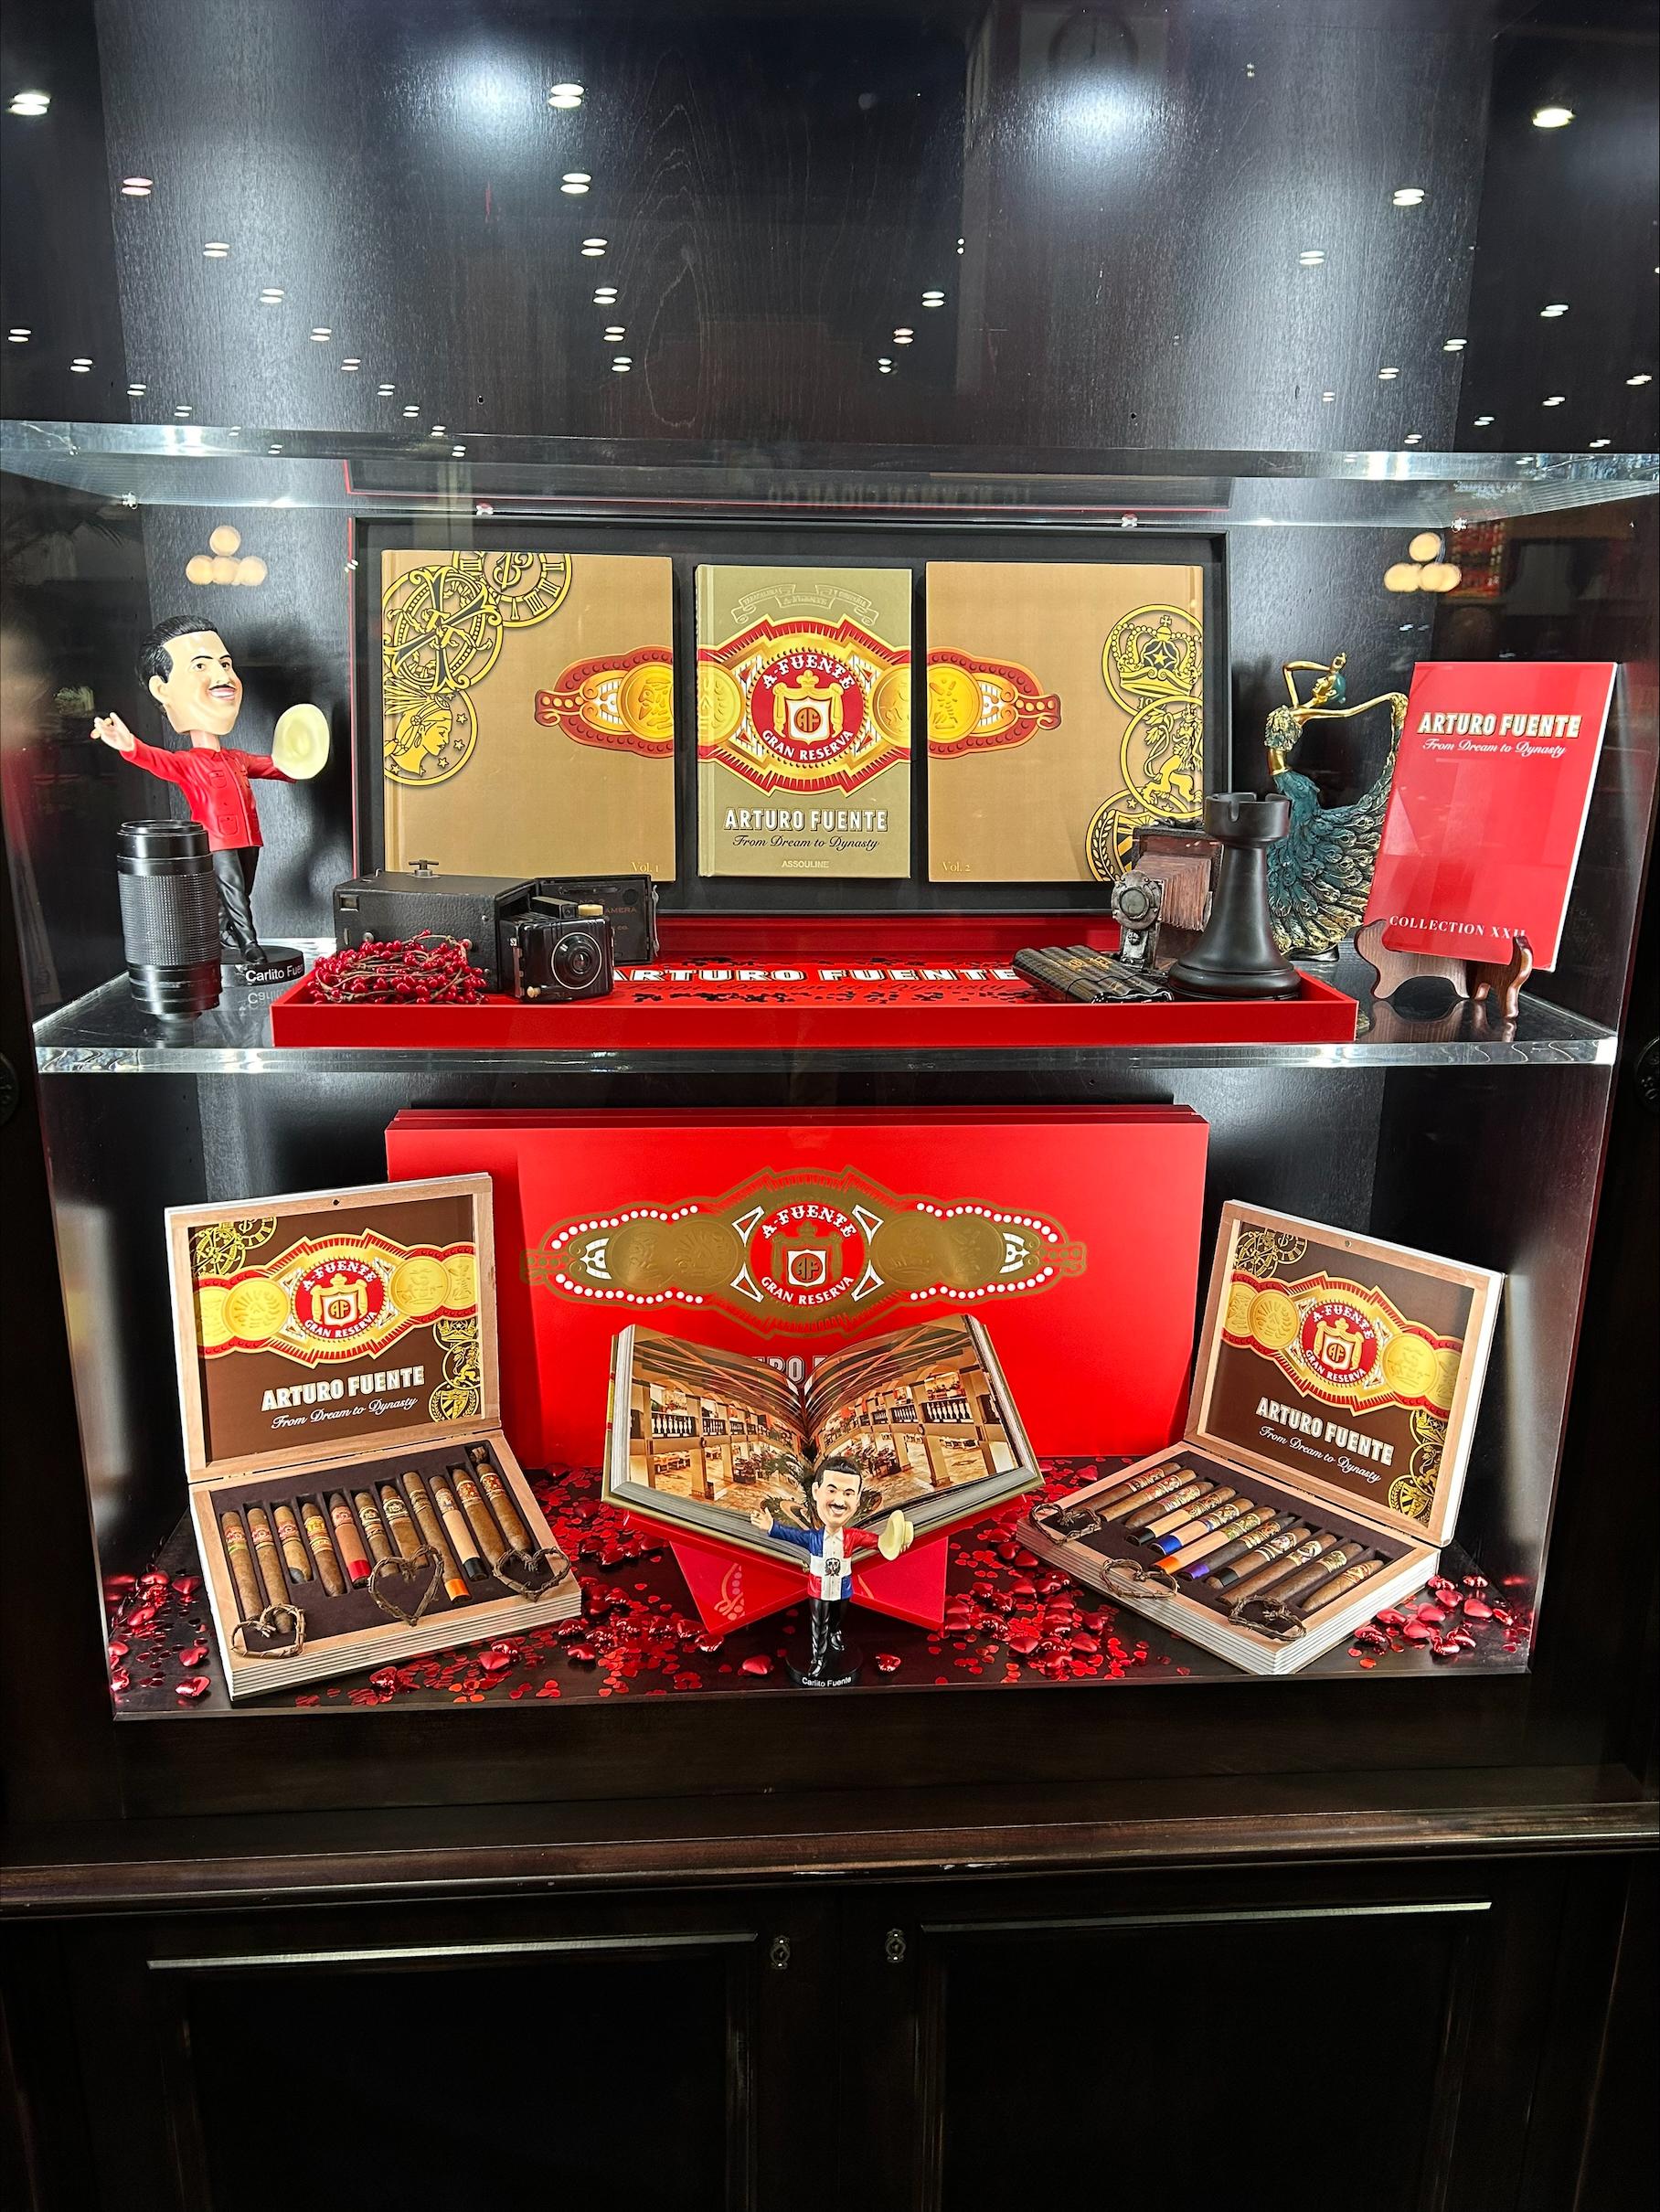 Arturo Fuente "FROM DREAM TO DYNASTY" Collection (Samplers & Book) with FREE Fuente Rare Pink Xikar Cutter